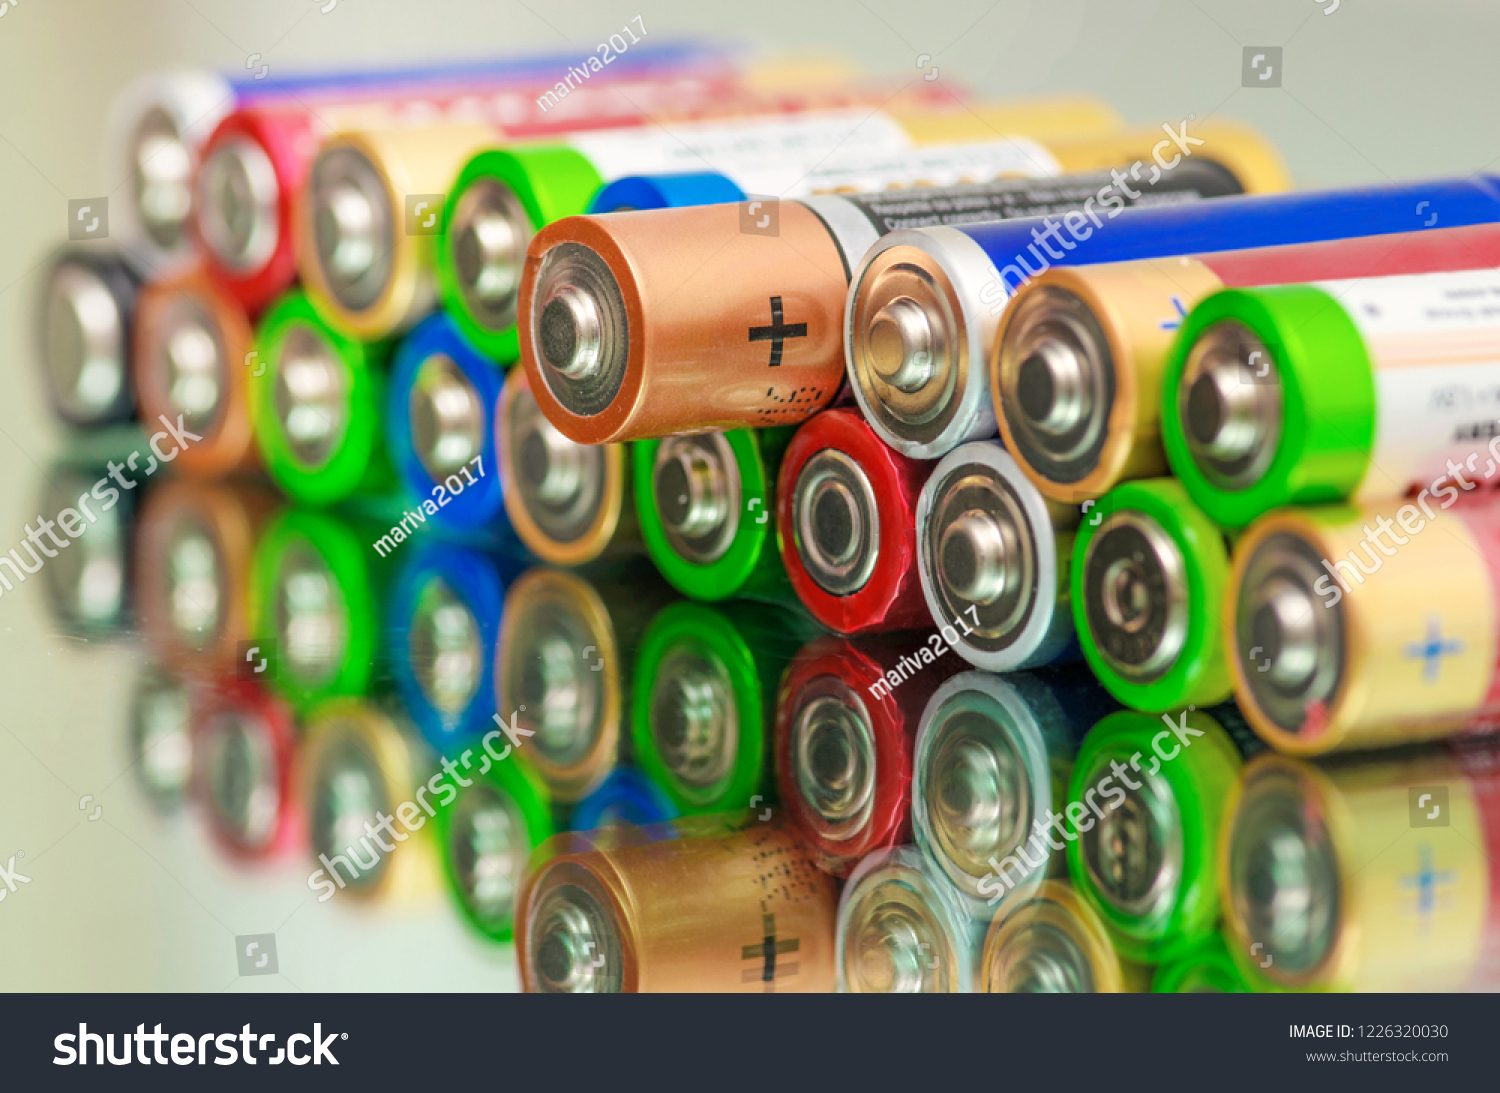 Closeup of pile of used alkaline batteries. Close up colorful rows of selection of AA batteries energy abstract background of colorful batteries. Alkaline battery aa size. Several batteries in rows. #1226320030